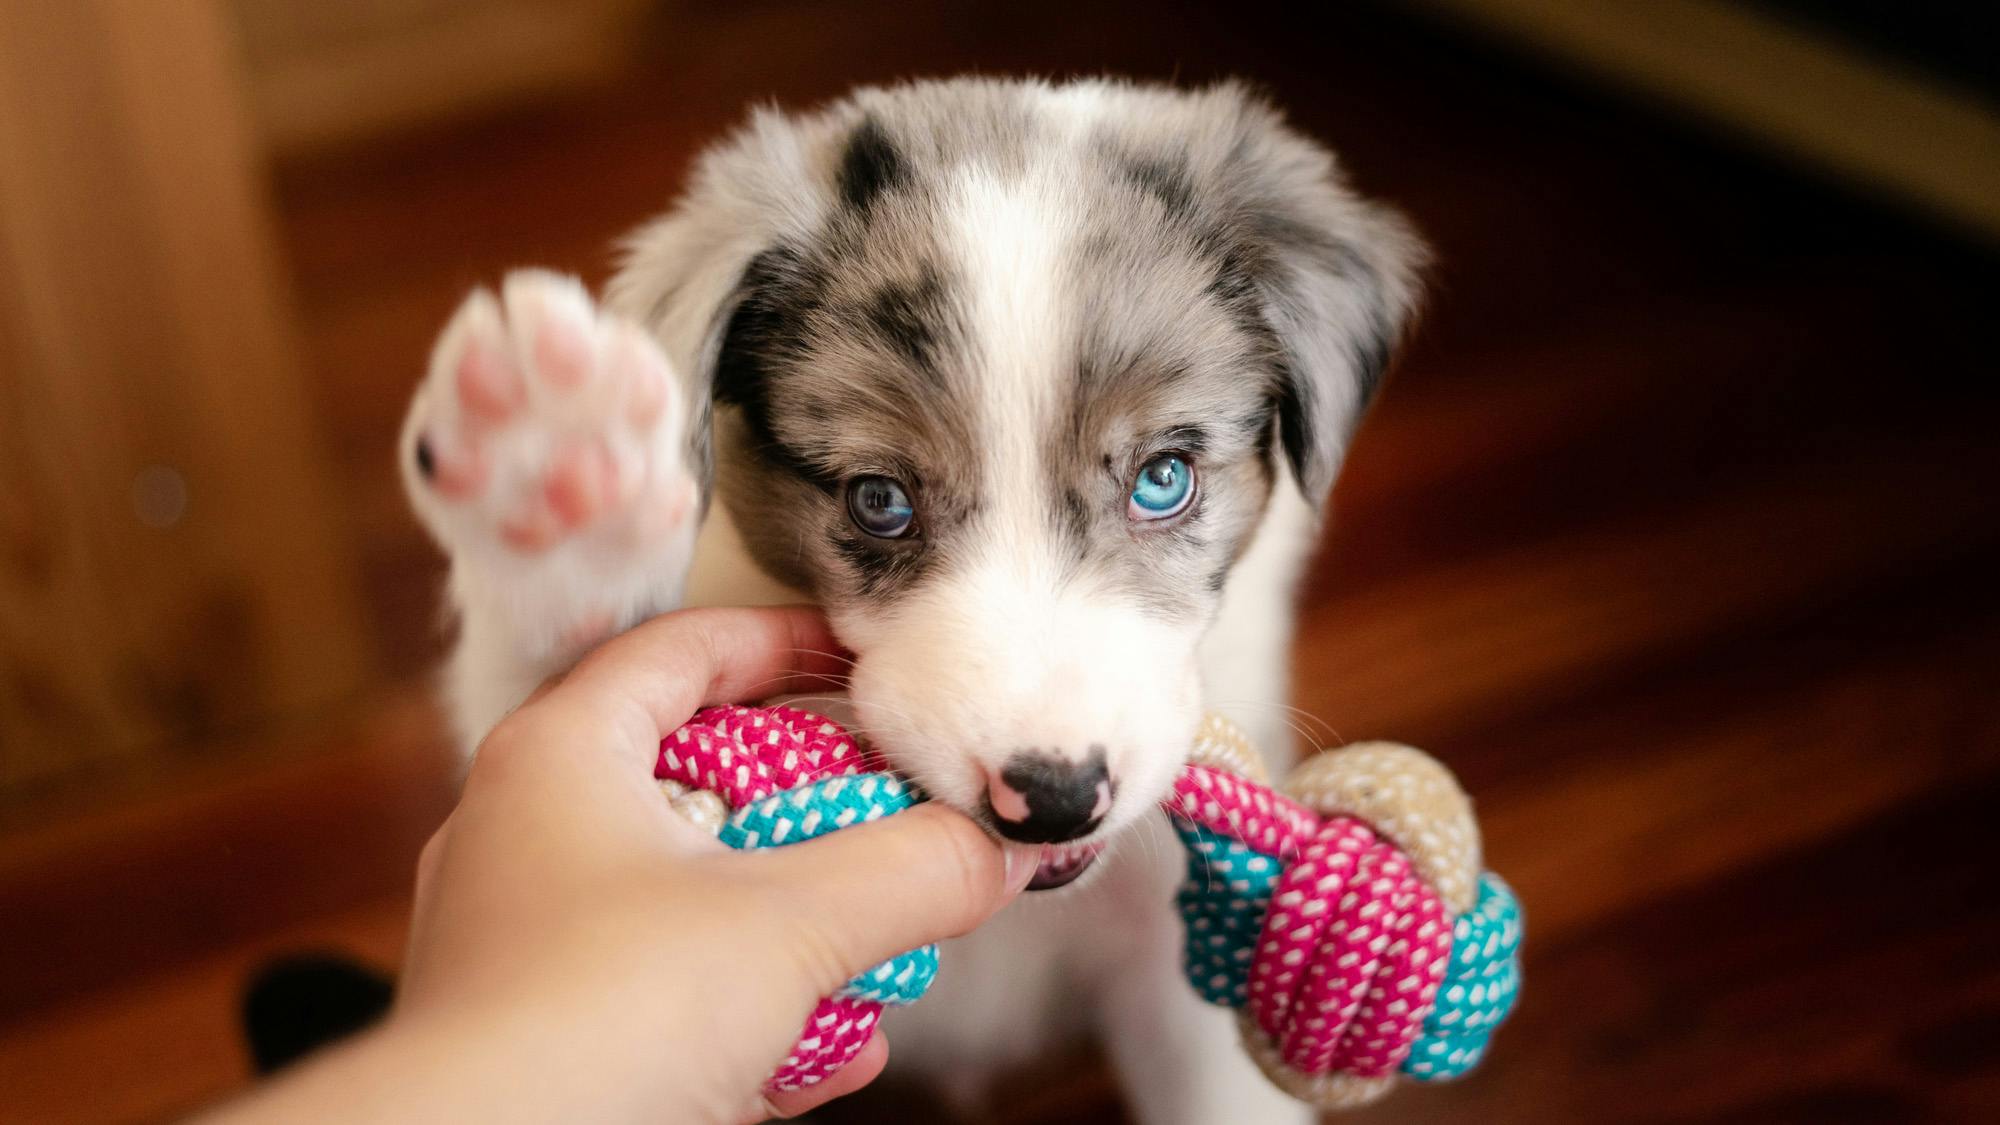 Australian Shepherd puppy offered a toy in place of fingers to help with unwanted puppy mouthing.